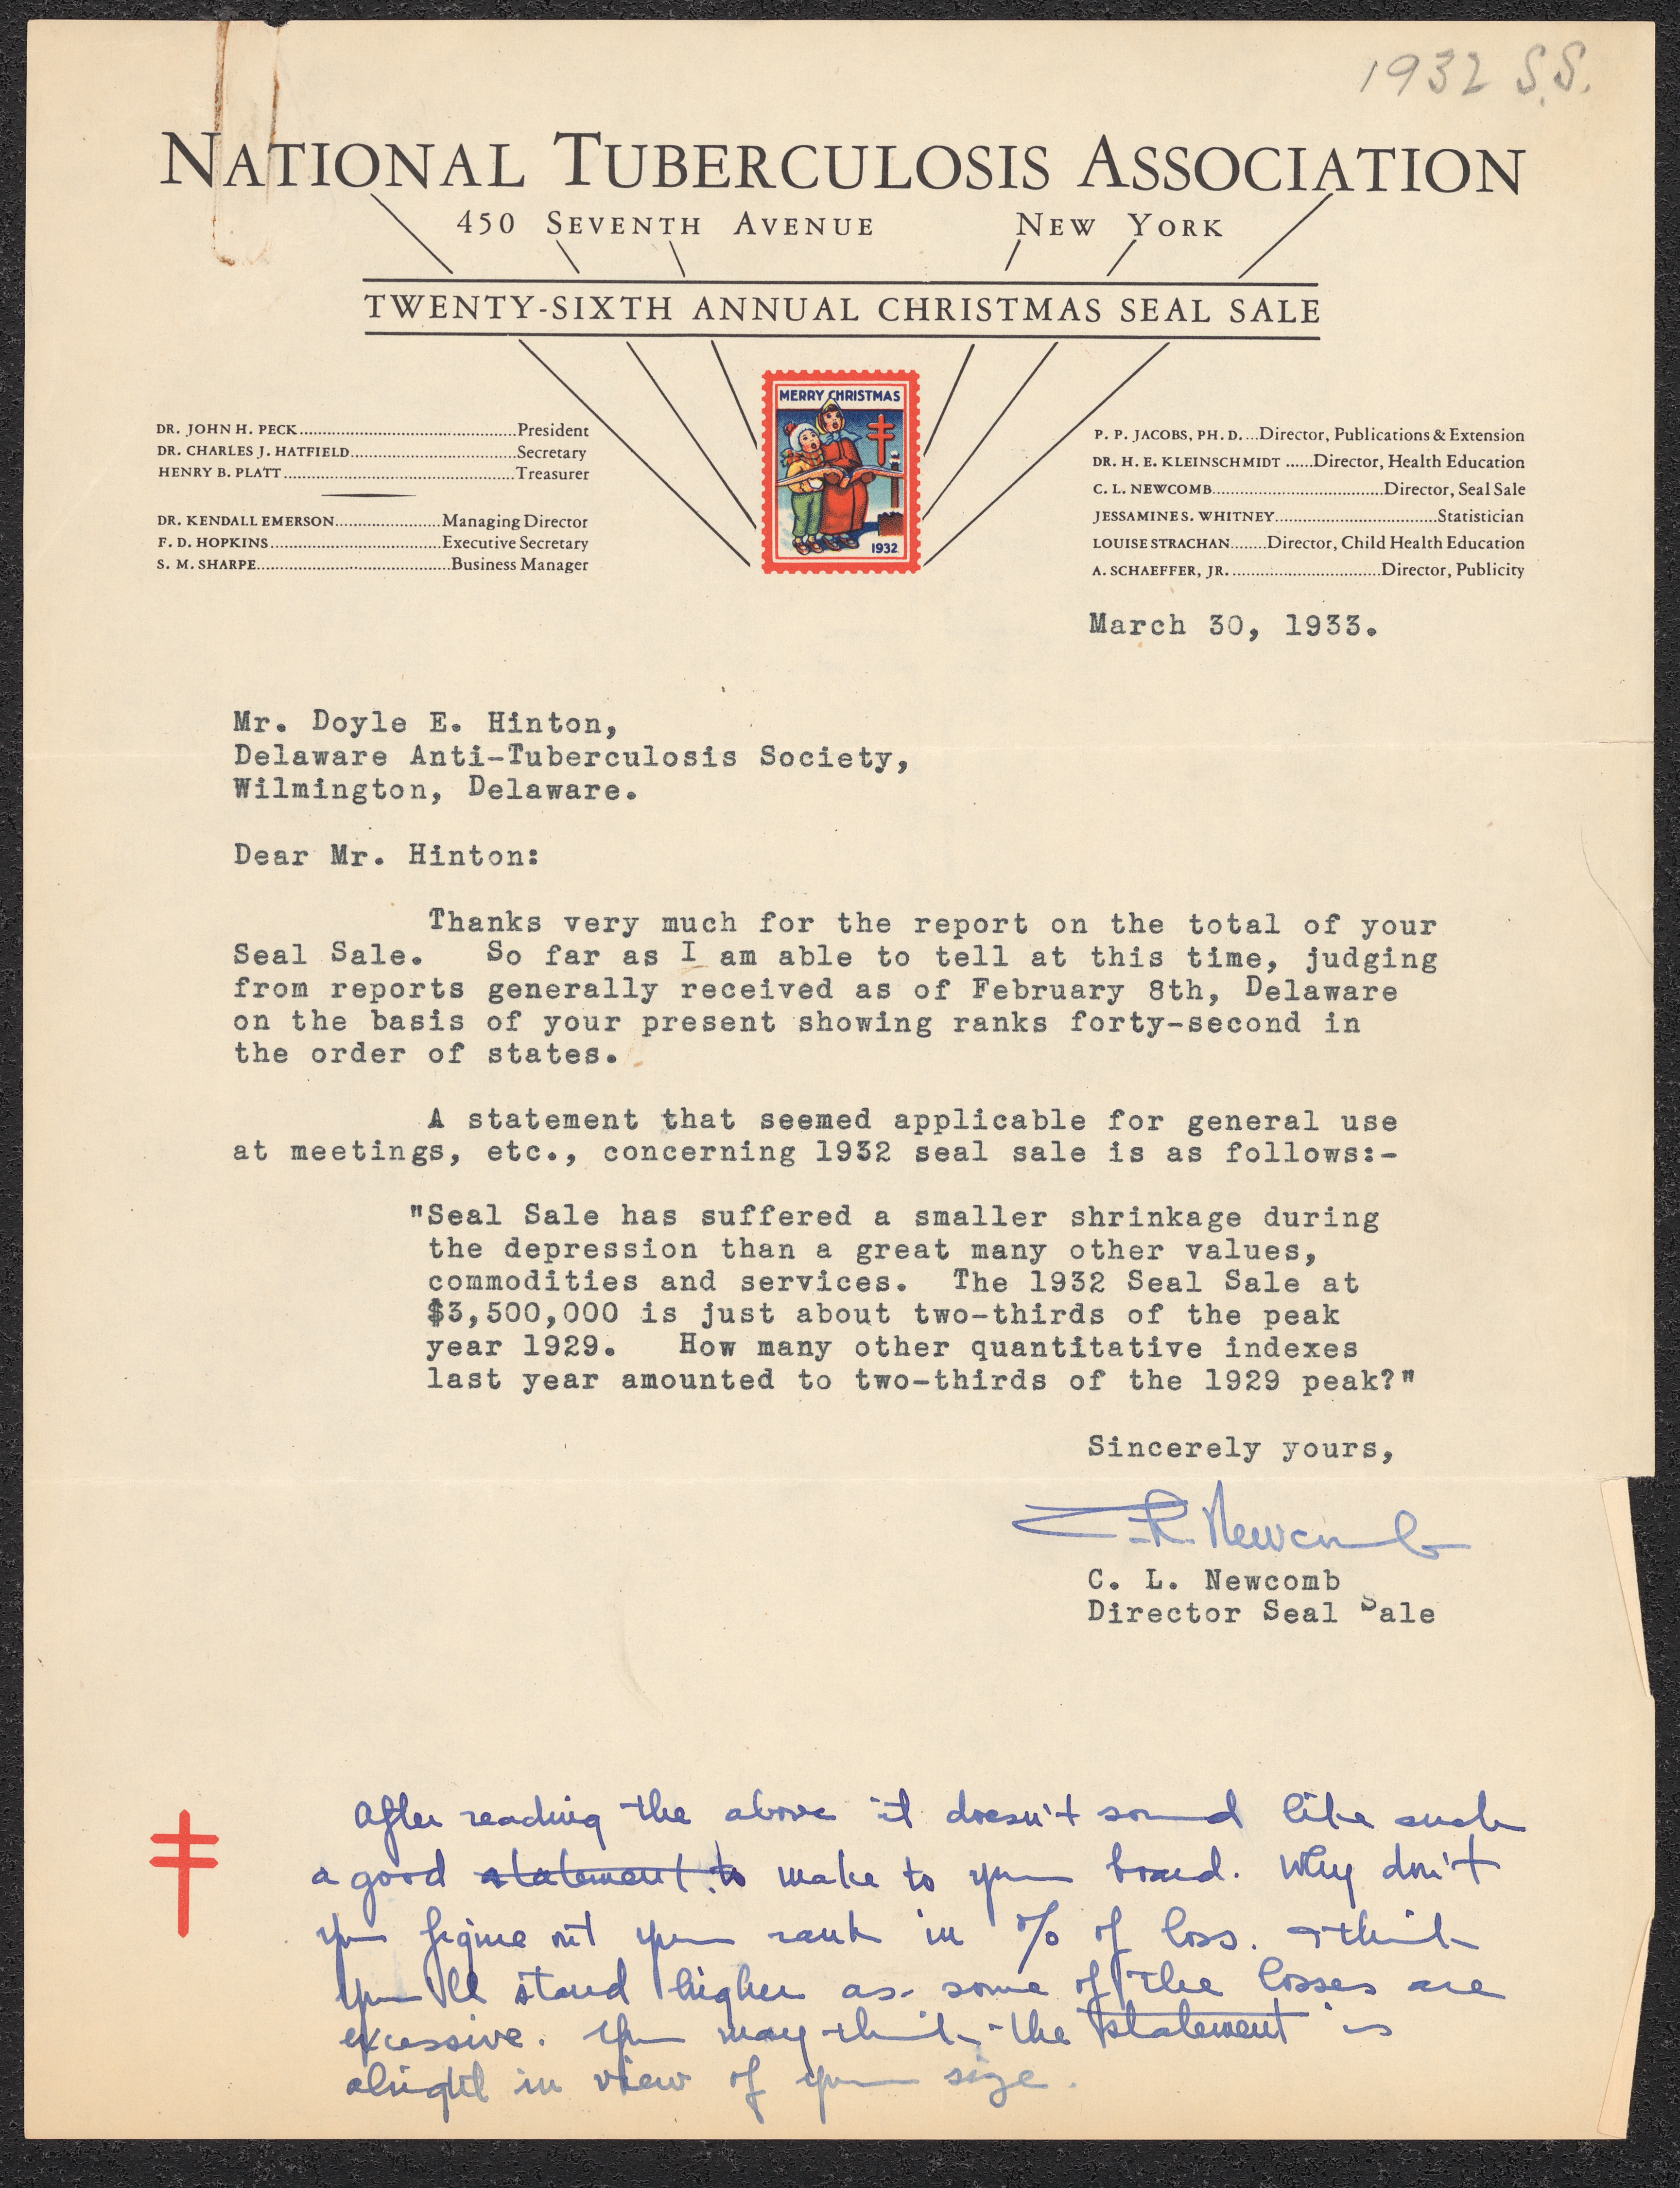 Letter, C.L Newcomb to Doyle E. Hinton, March 30, 1933